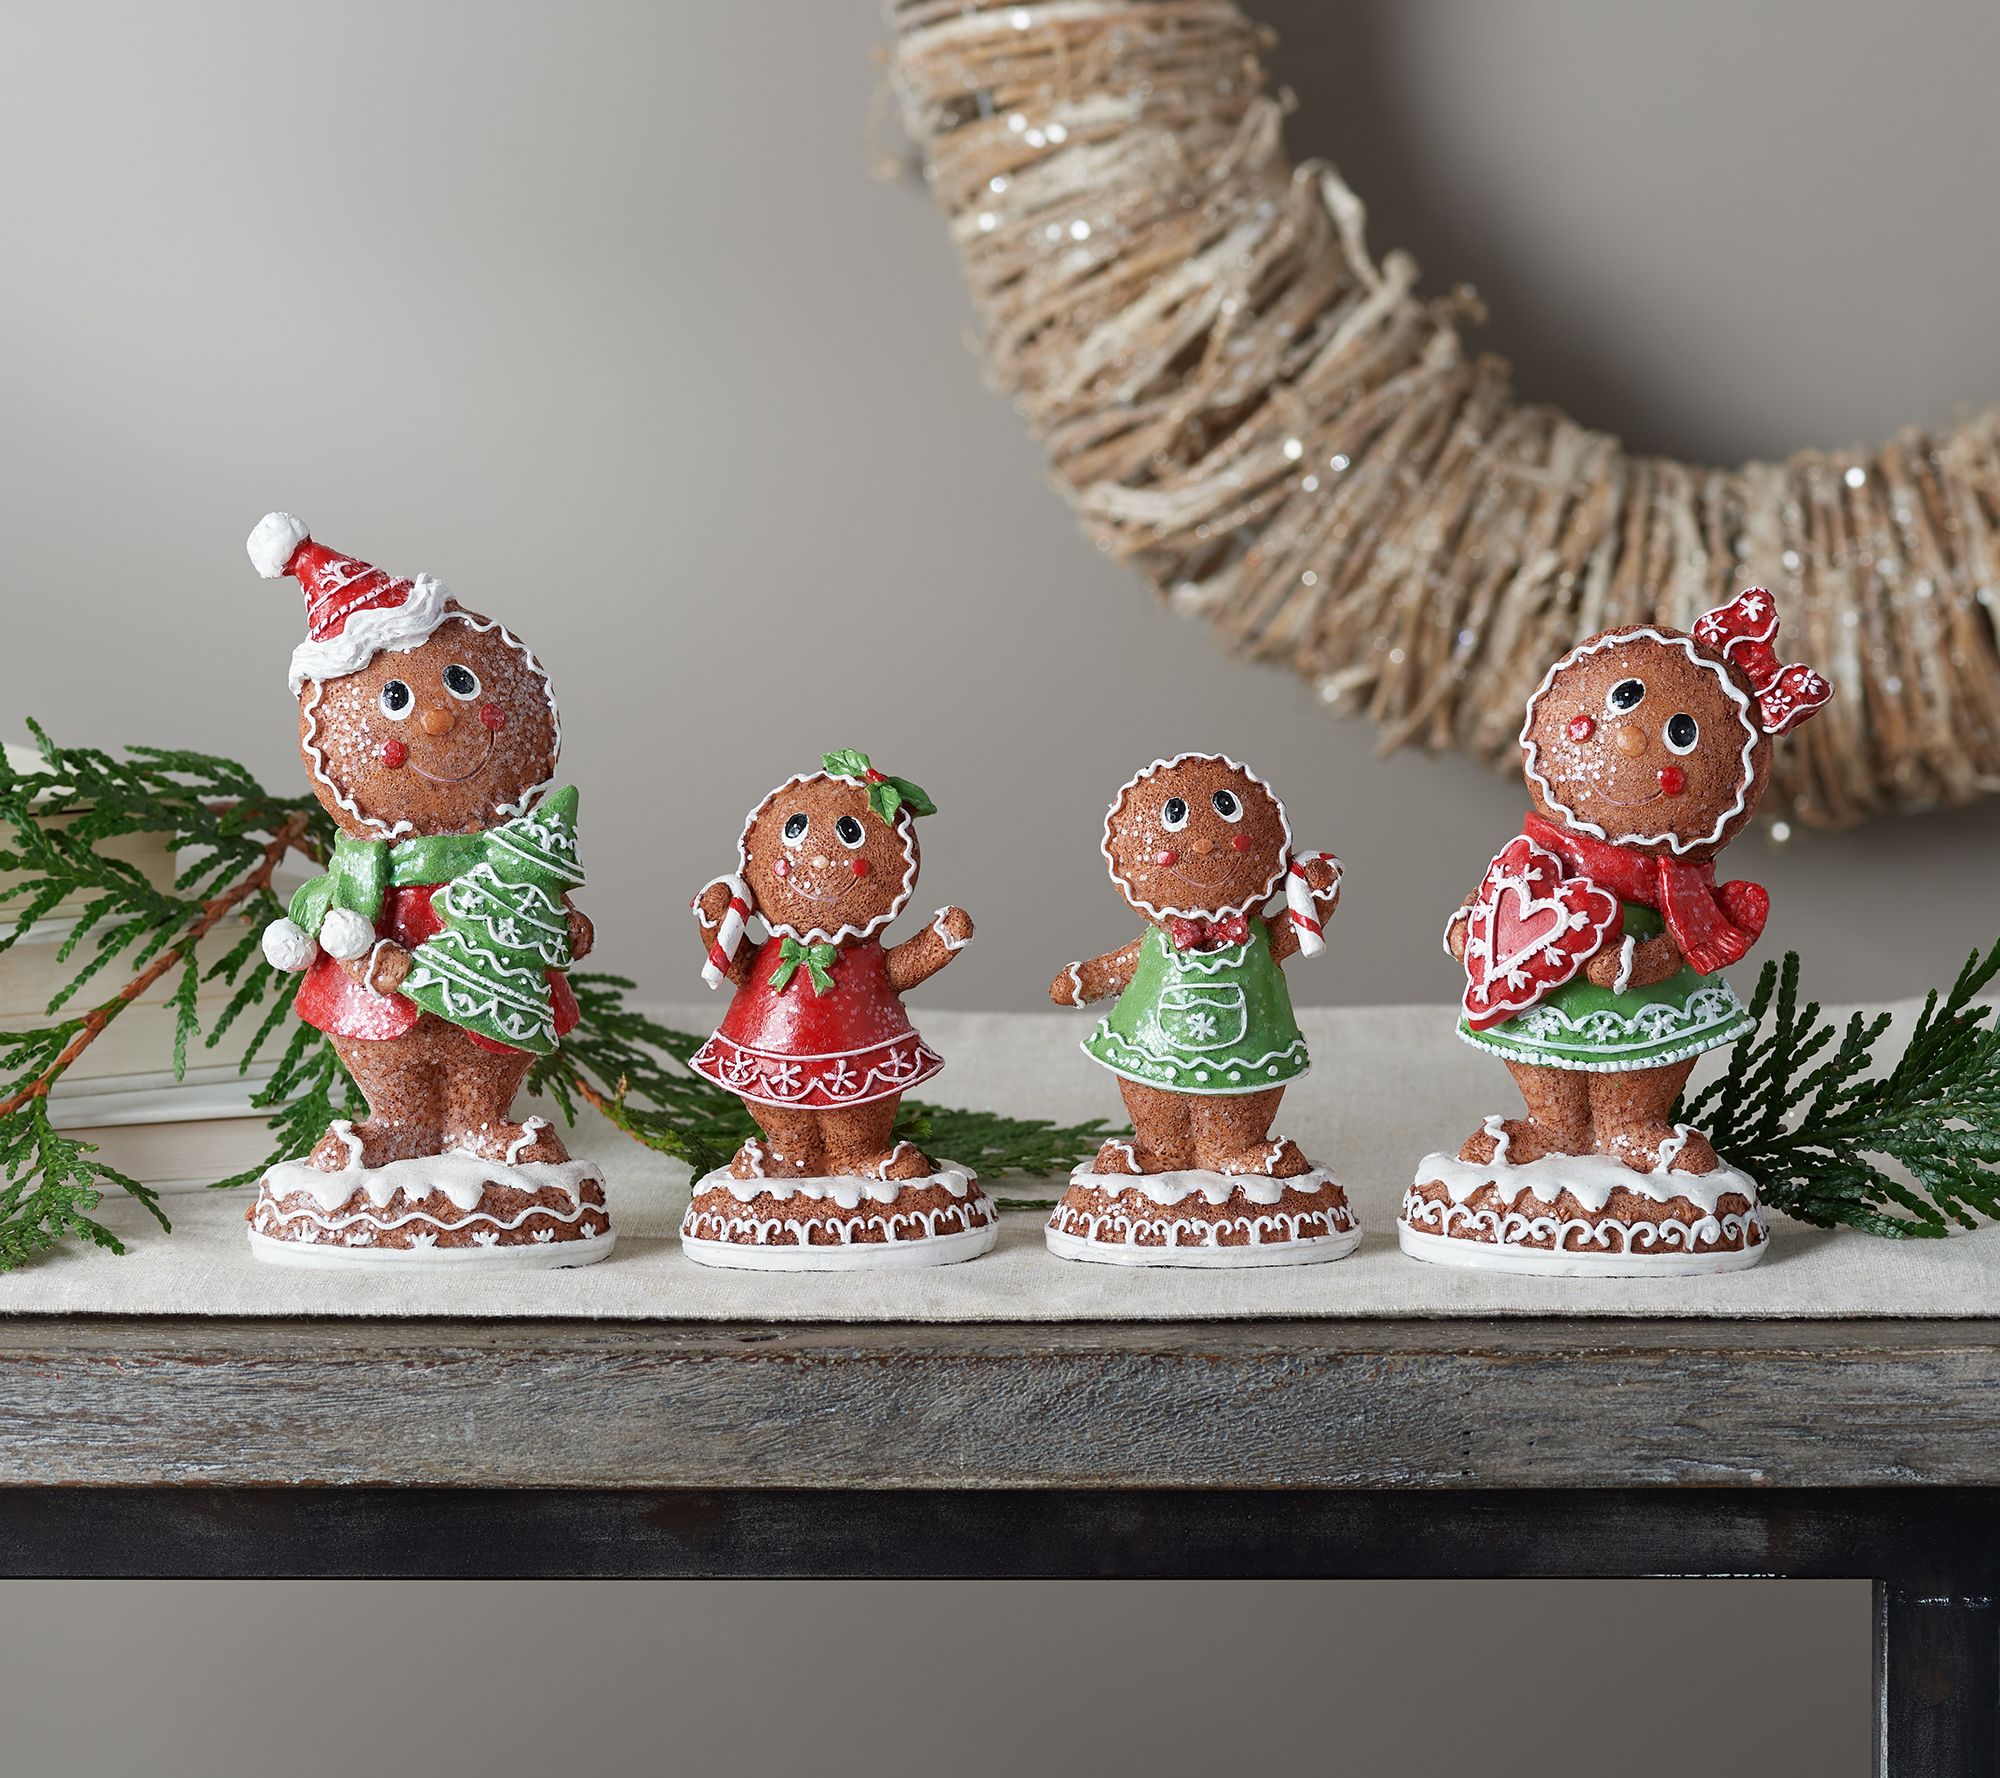 4-Piece Gingerbread Family Figurines by Valerie - QVC.com